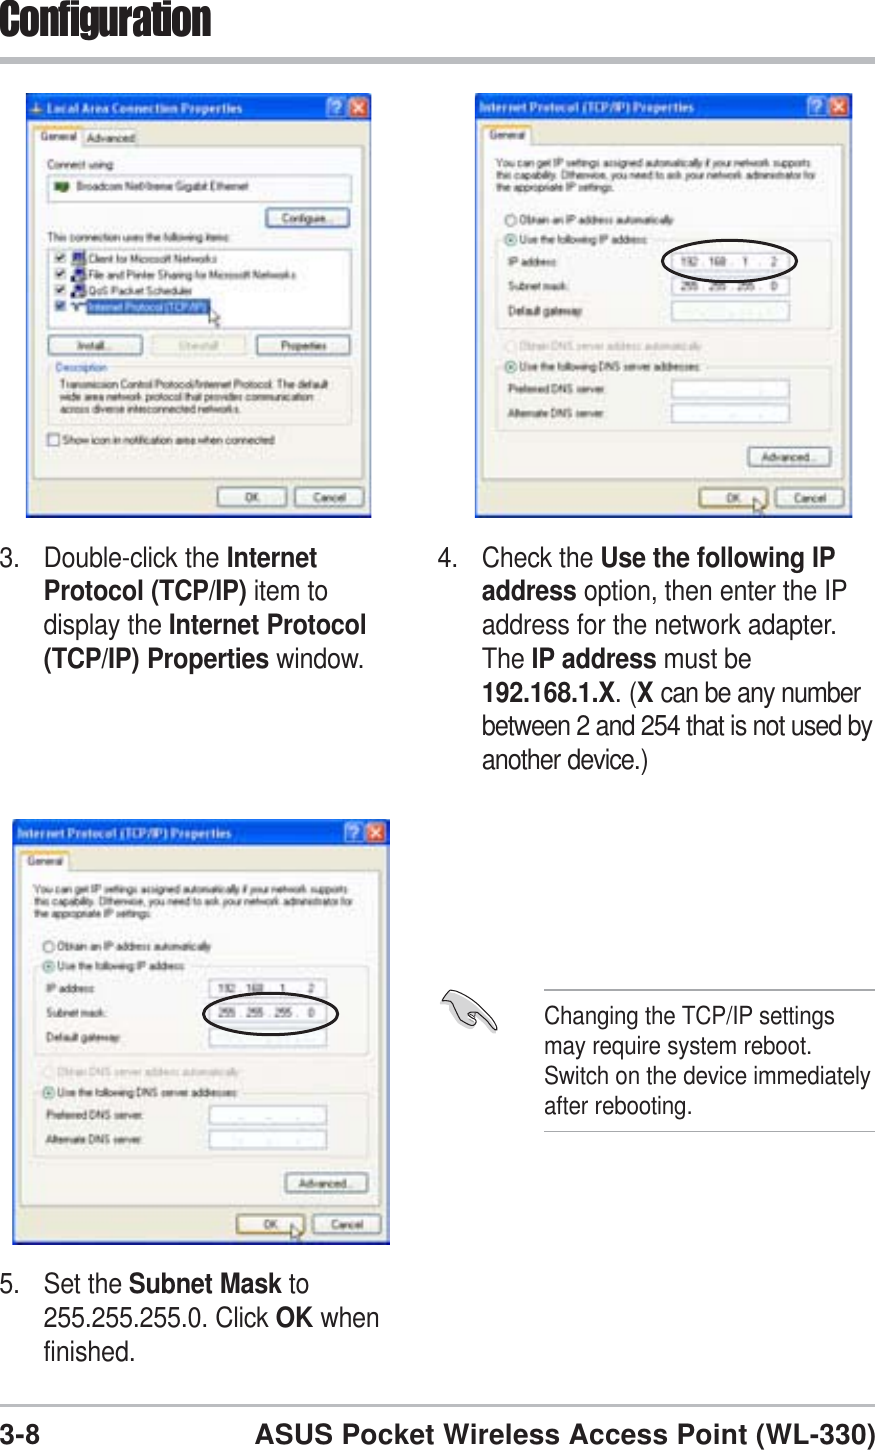 3-8ASUS Pocket Wireless Access Point (WL-330)Configuration3. Double-click the InternetProtocol (TCP/IP) item todisplay the Internet Protocol(TCP/IP) Properties window.4. Check the Use the following IPaddress option, then enter the IPaddress for the network adapter.The IP address must be192.168.1.X. (Xcan be any numberbetween 2 and 254 that is not used byanother device.)5. Set the Subnet Mask to255.255.255.0. Click OK whenfinished.Changing the TCP/IP settingsmay require system reboot.Switch on the device immediatelyafter rebooting.